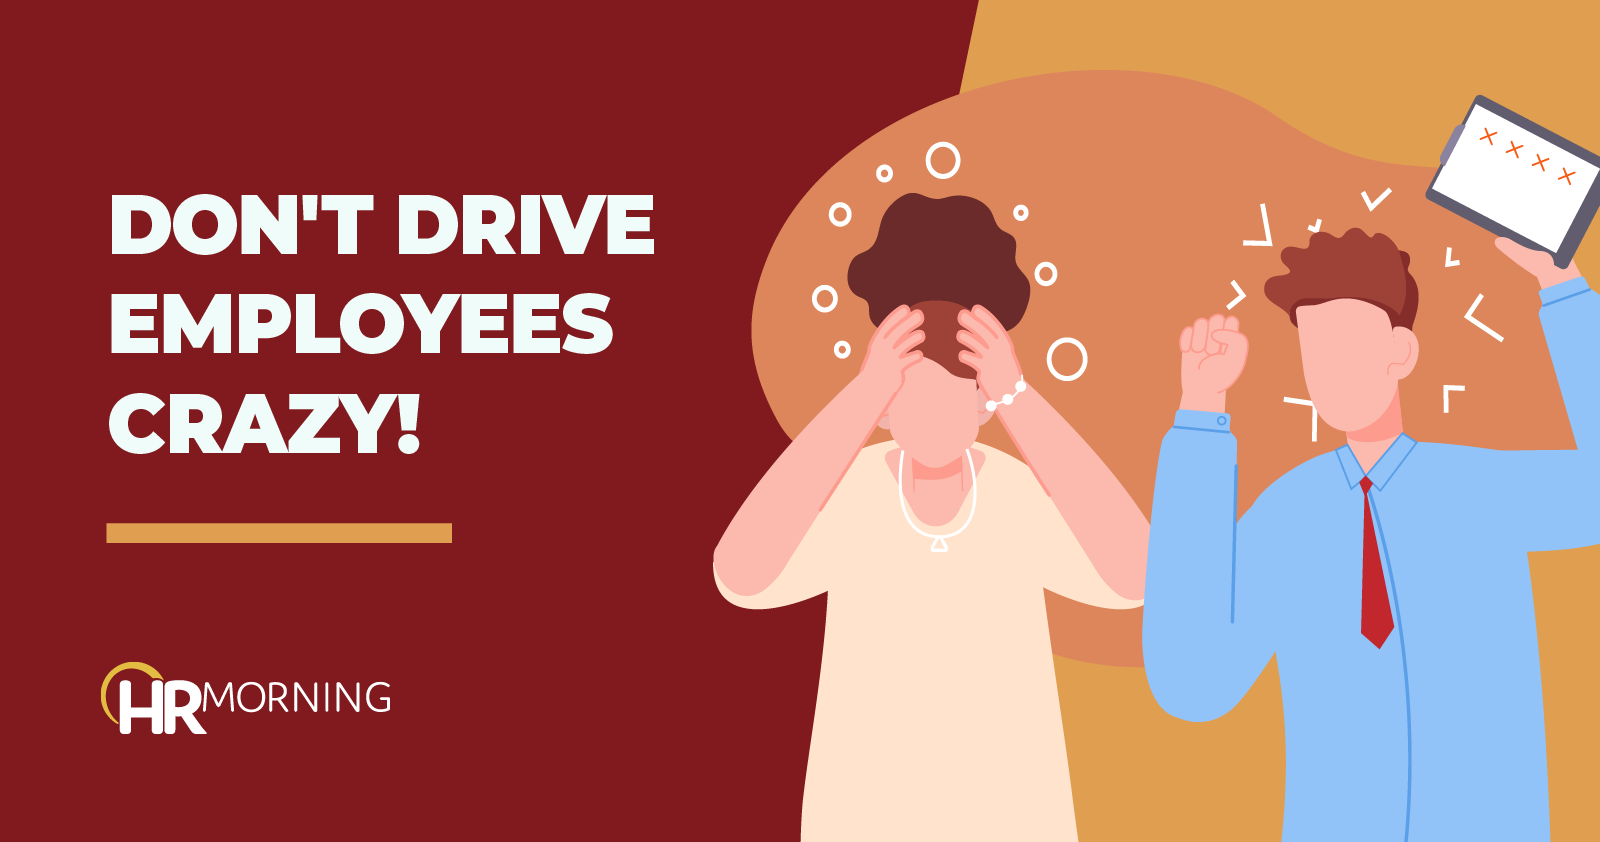 6 behaviors that drive employees crazy – and how not to be THAT boss